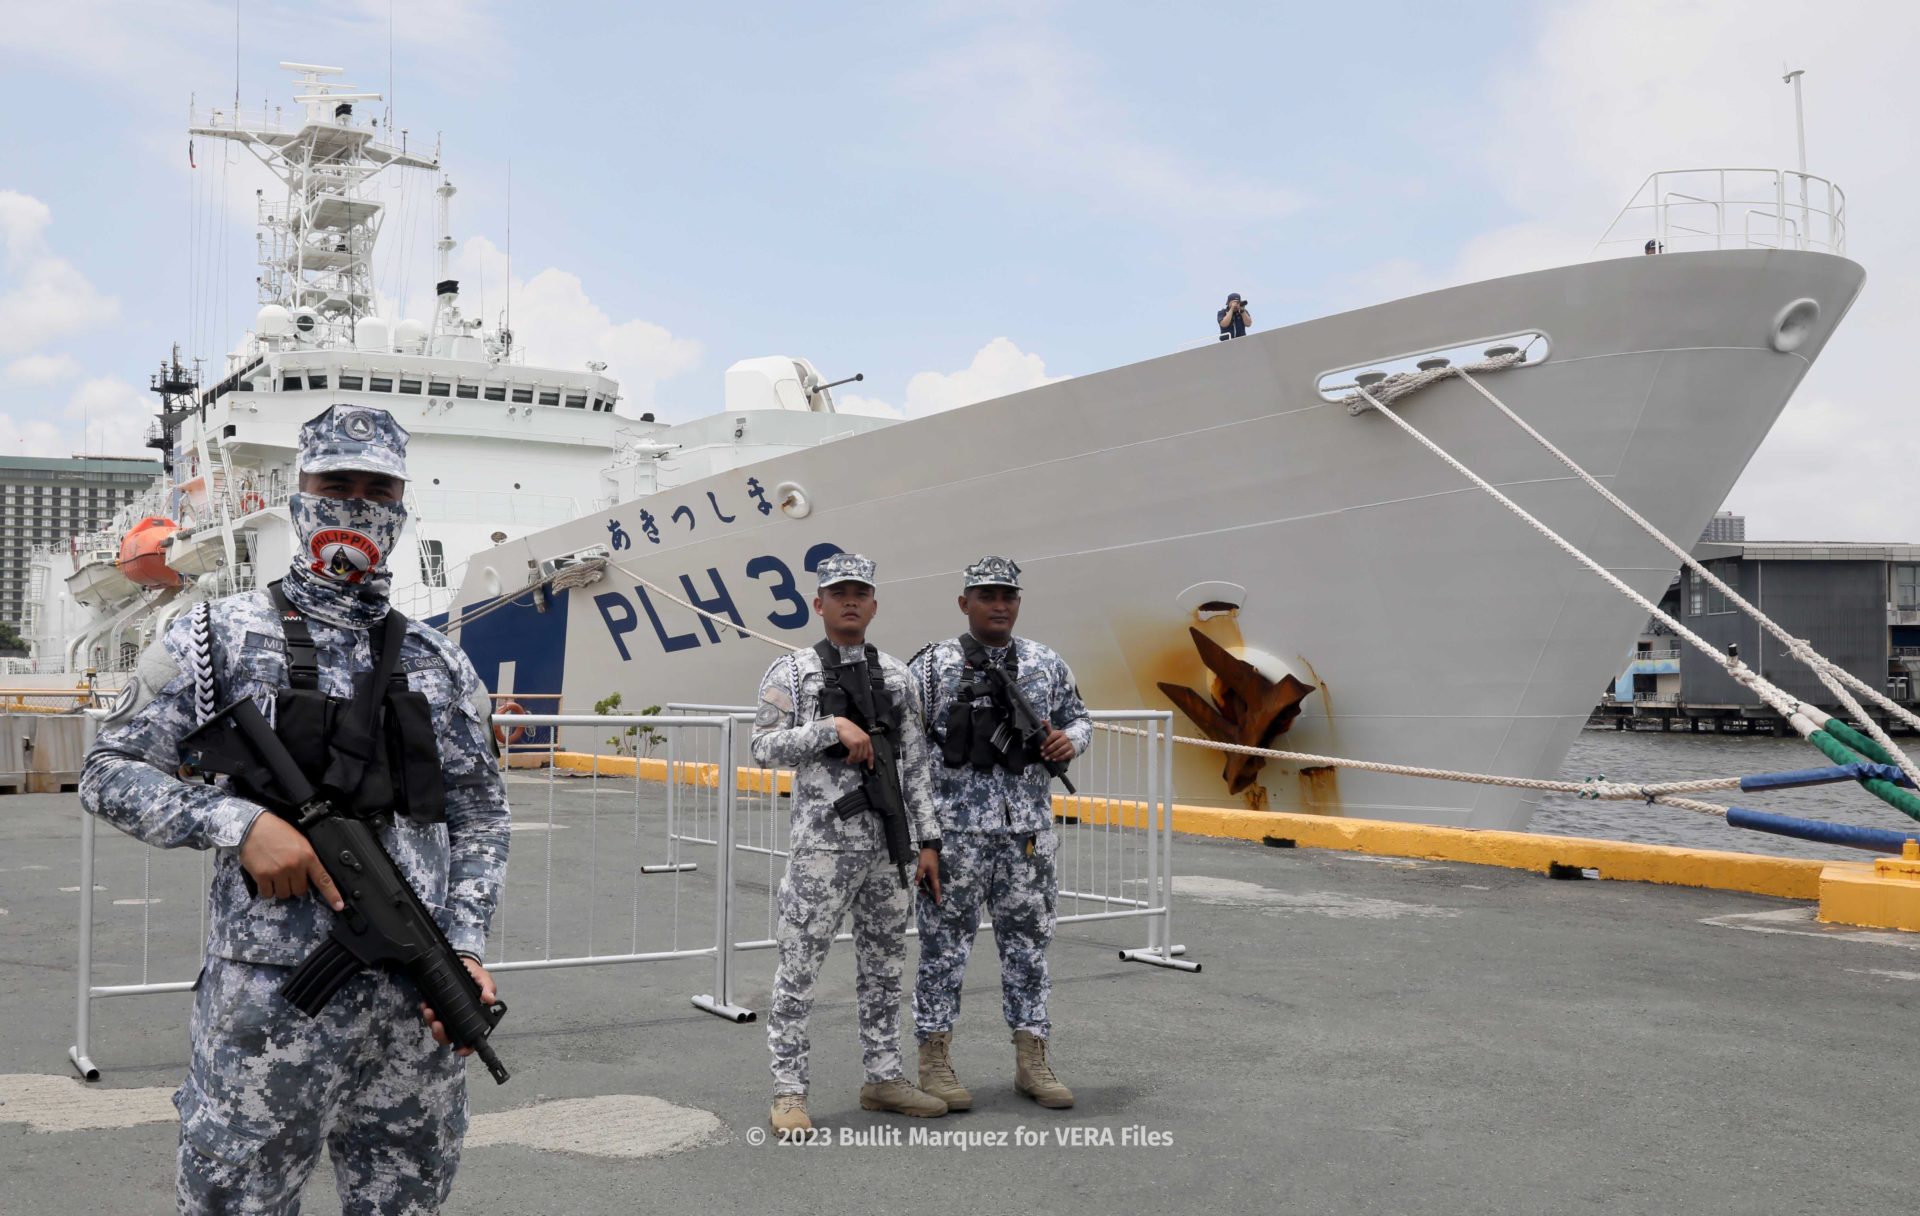 060123 Japan US Coast Guard in PH 3/11 Photo by Bullit Marquez